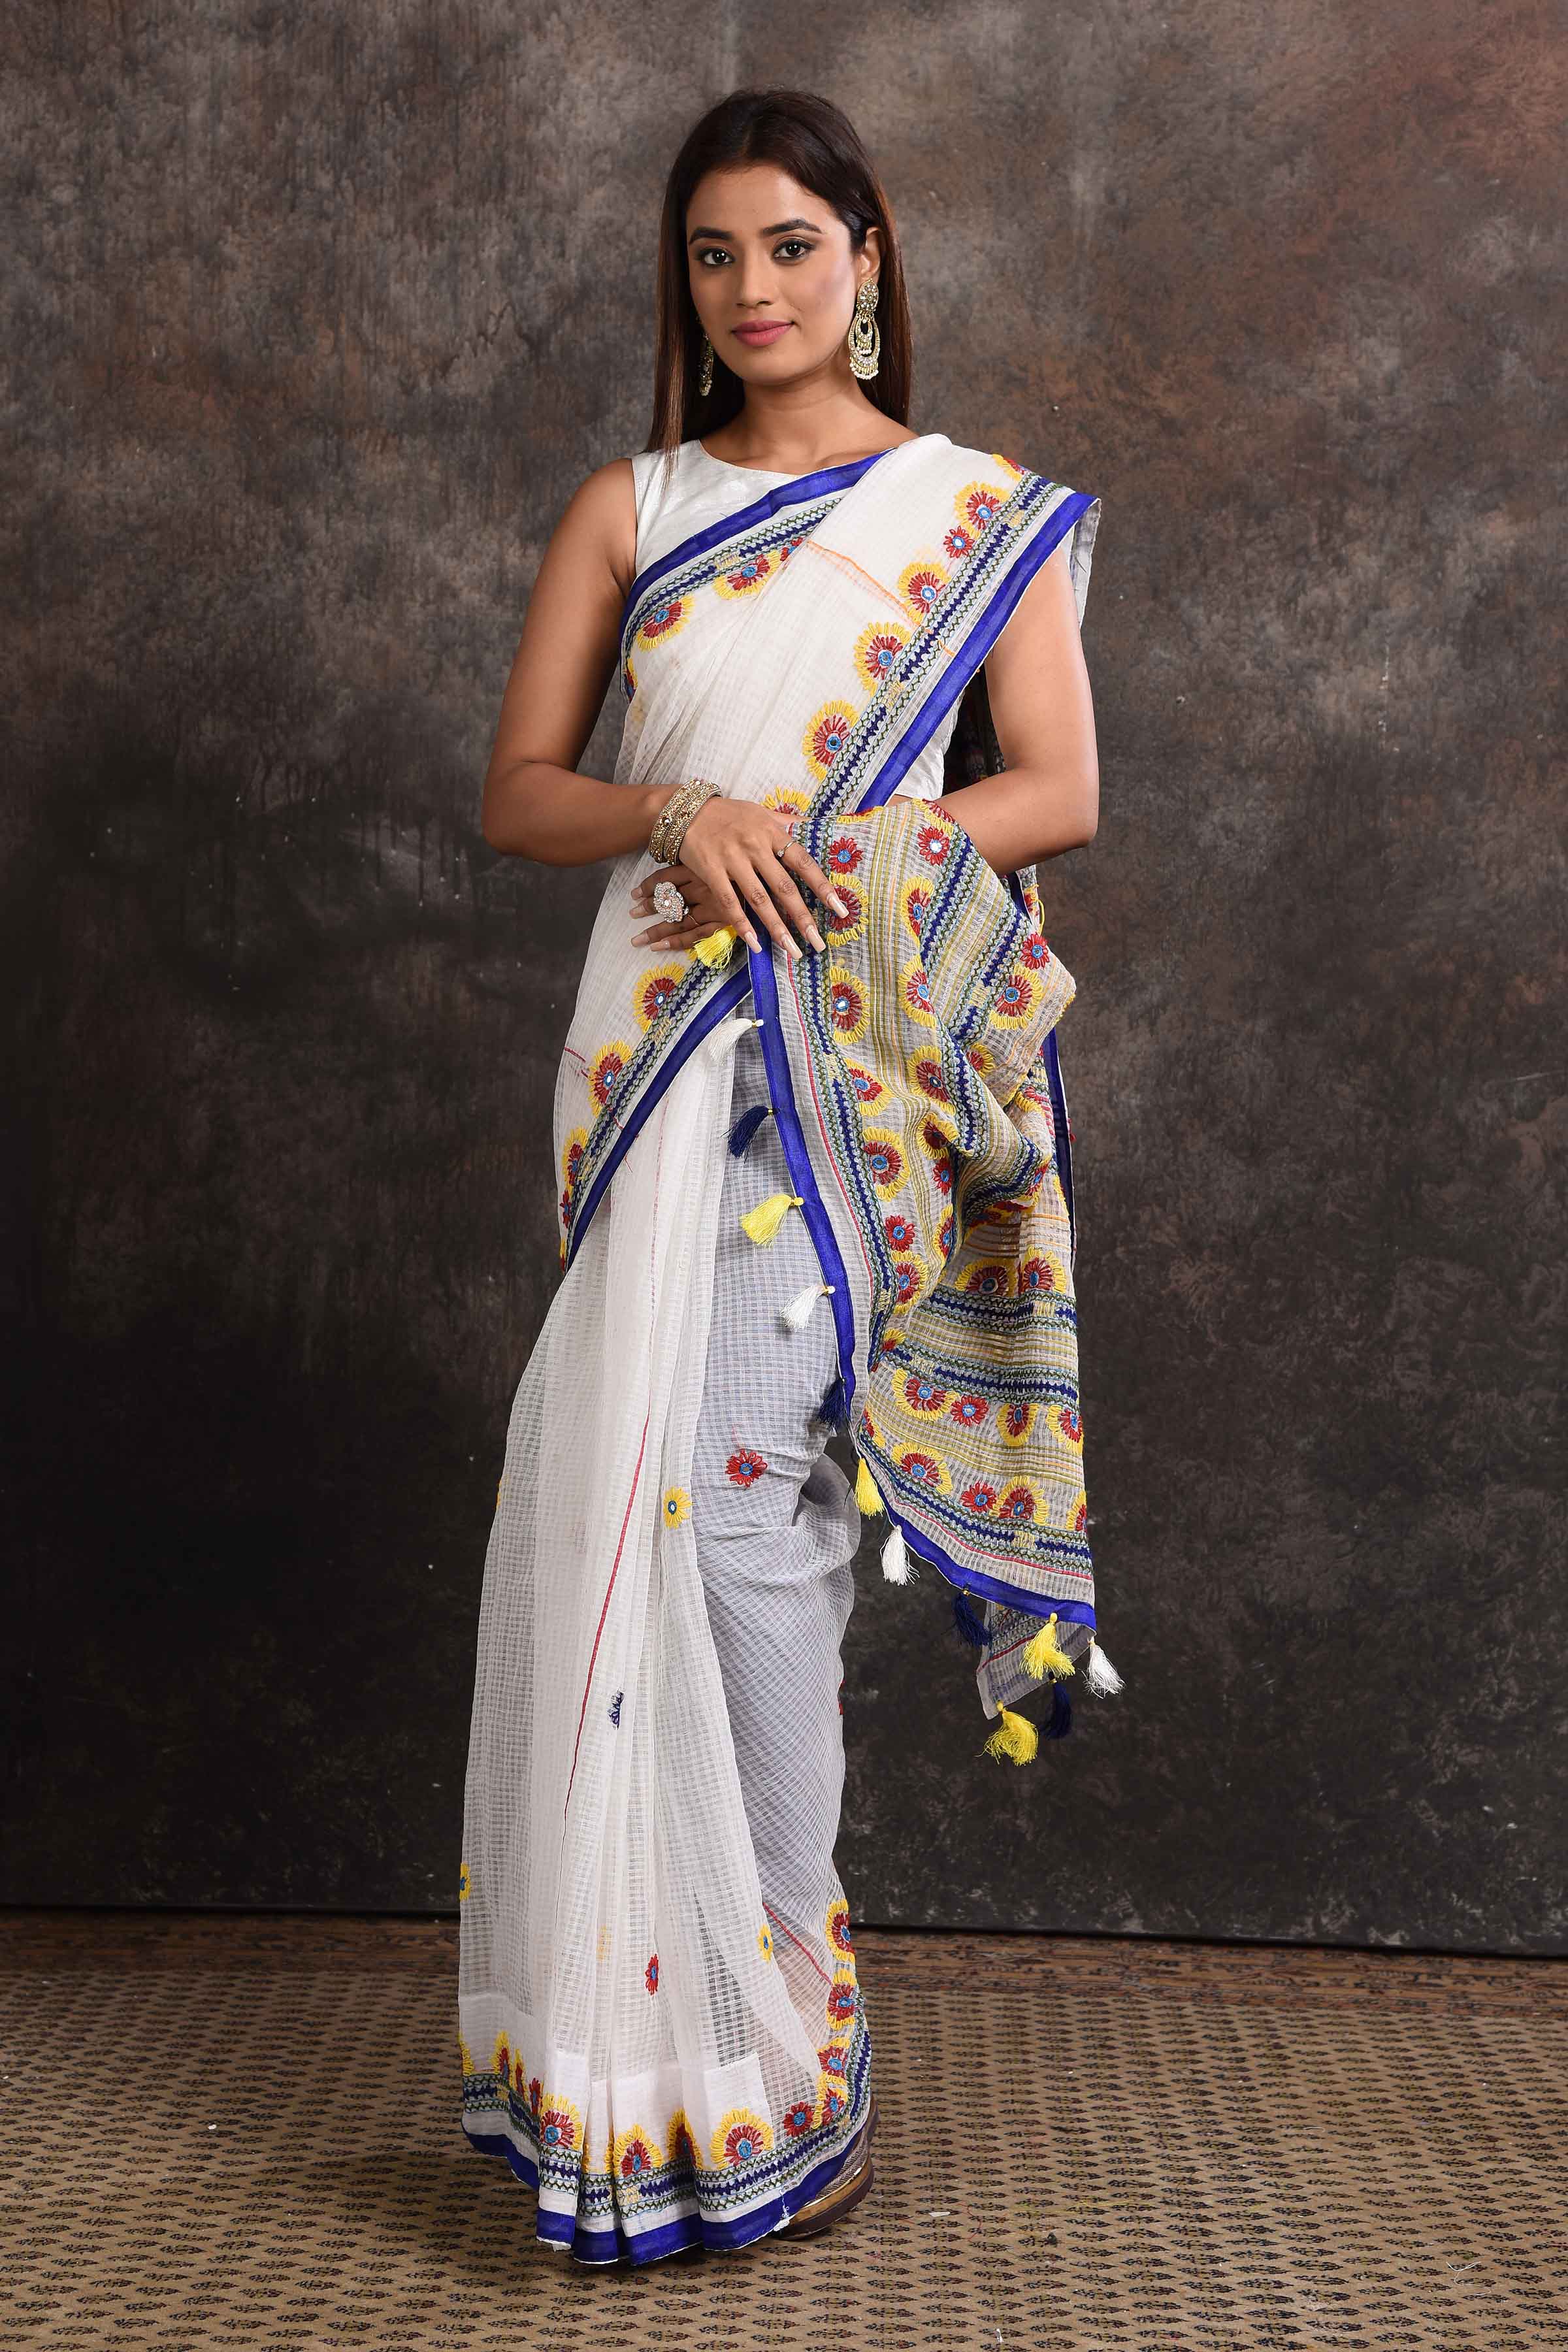 Cotton Sarees for Women: Check out the Best Cotton Sarees for